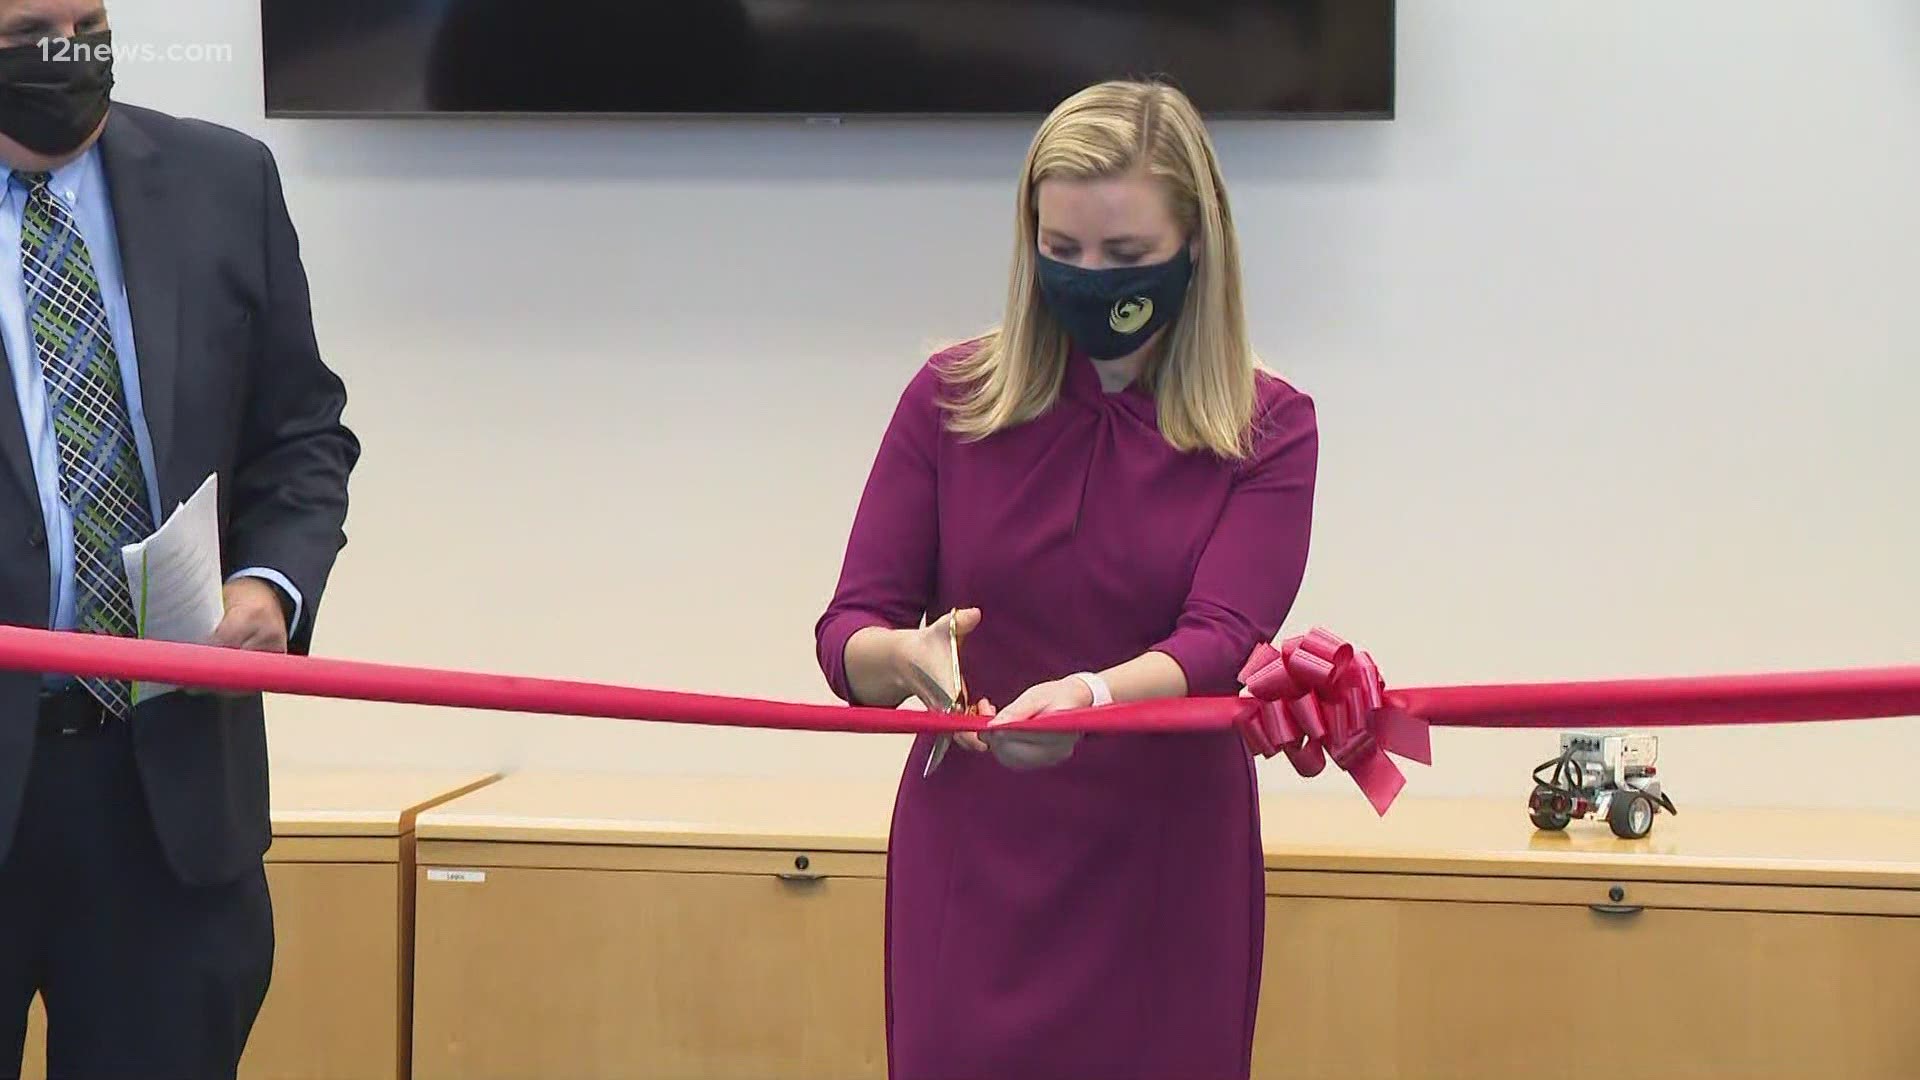 The Phoenix Precision Project was started back in 2019 to create 500 jobs for neurodiverse people. Today, the project opened a new technology center in Phoenix.